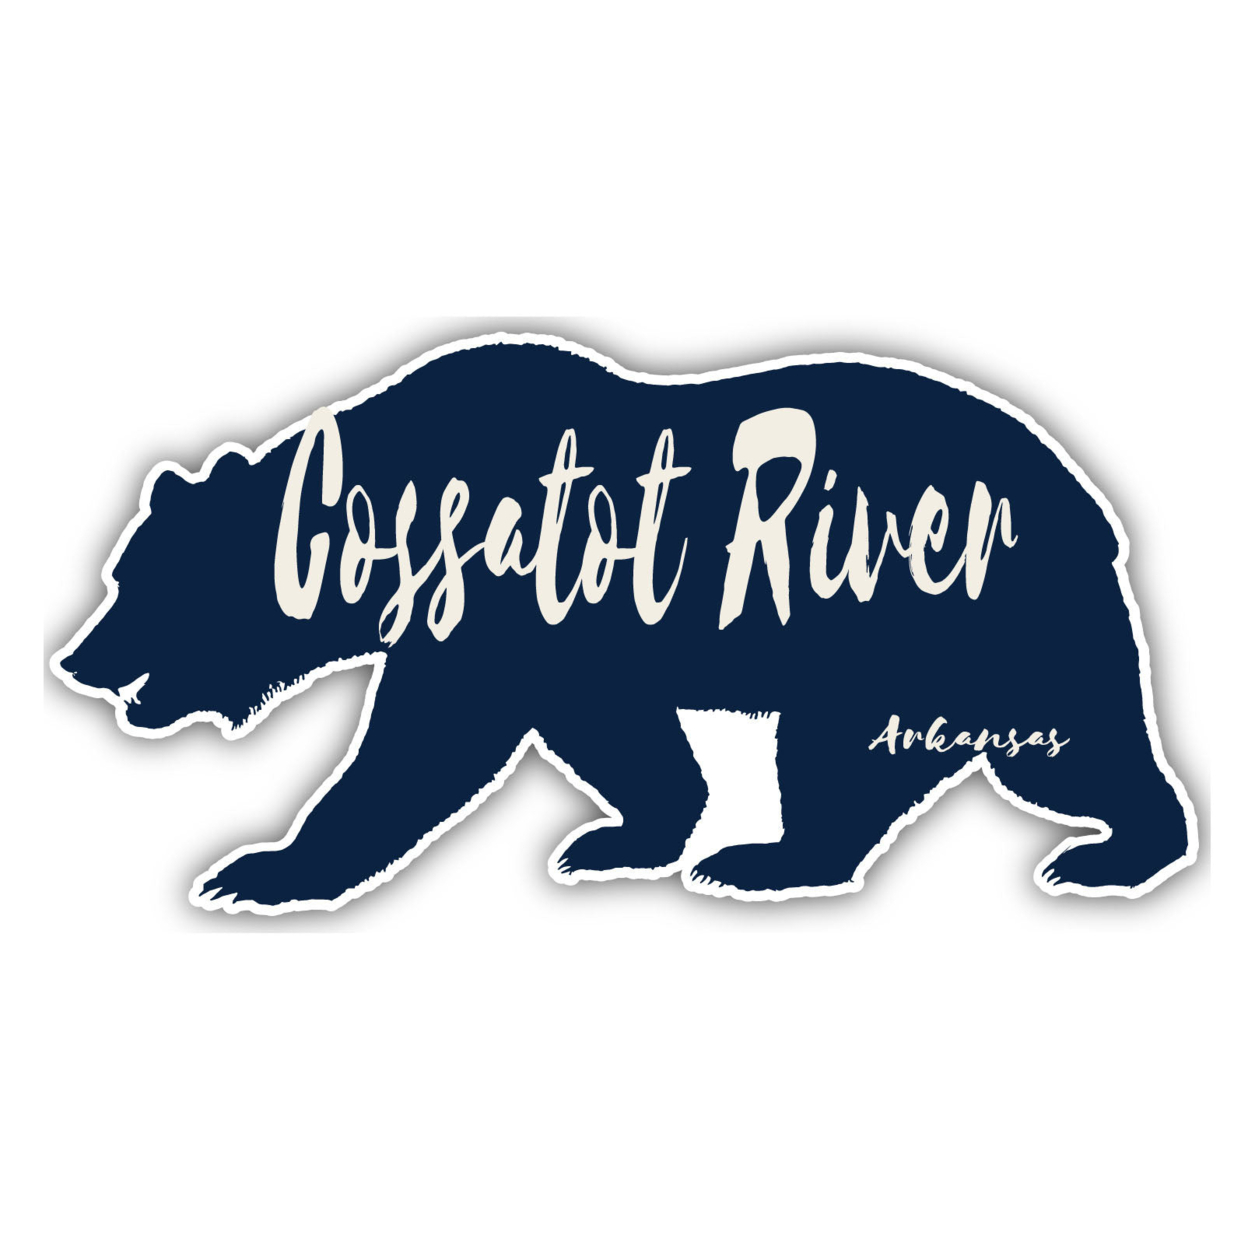 Cossatot River Arkansas Souvenir Decorative Stickers (Choose Theme And Size) - 4-Pack, 10-Inch, Great Outdoors